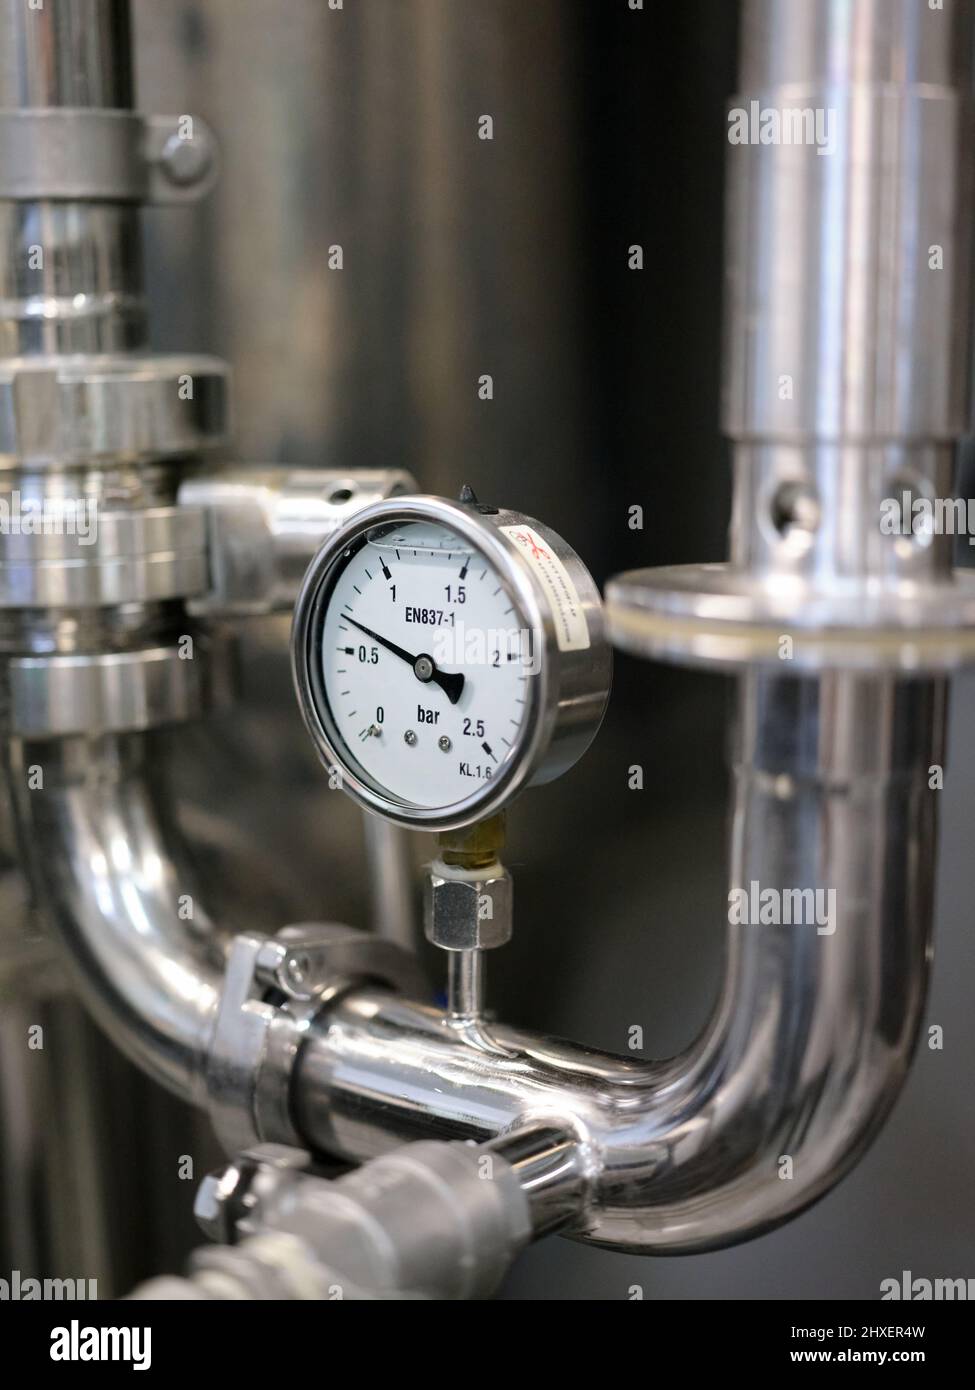 Detail of the barometer on a machine in a brewery. Stock Photo